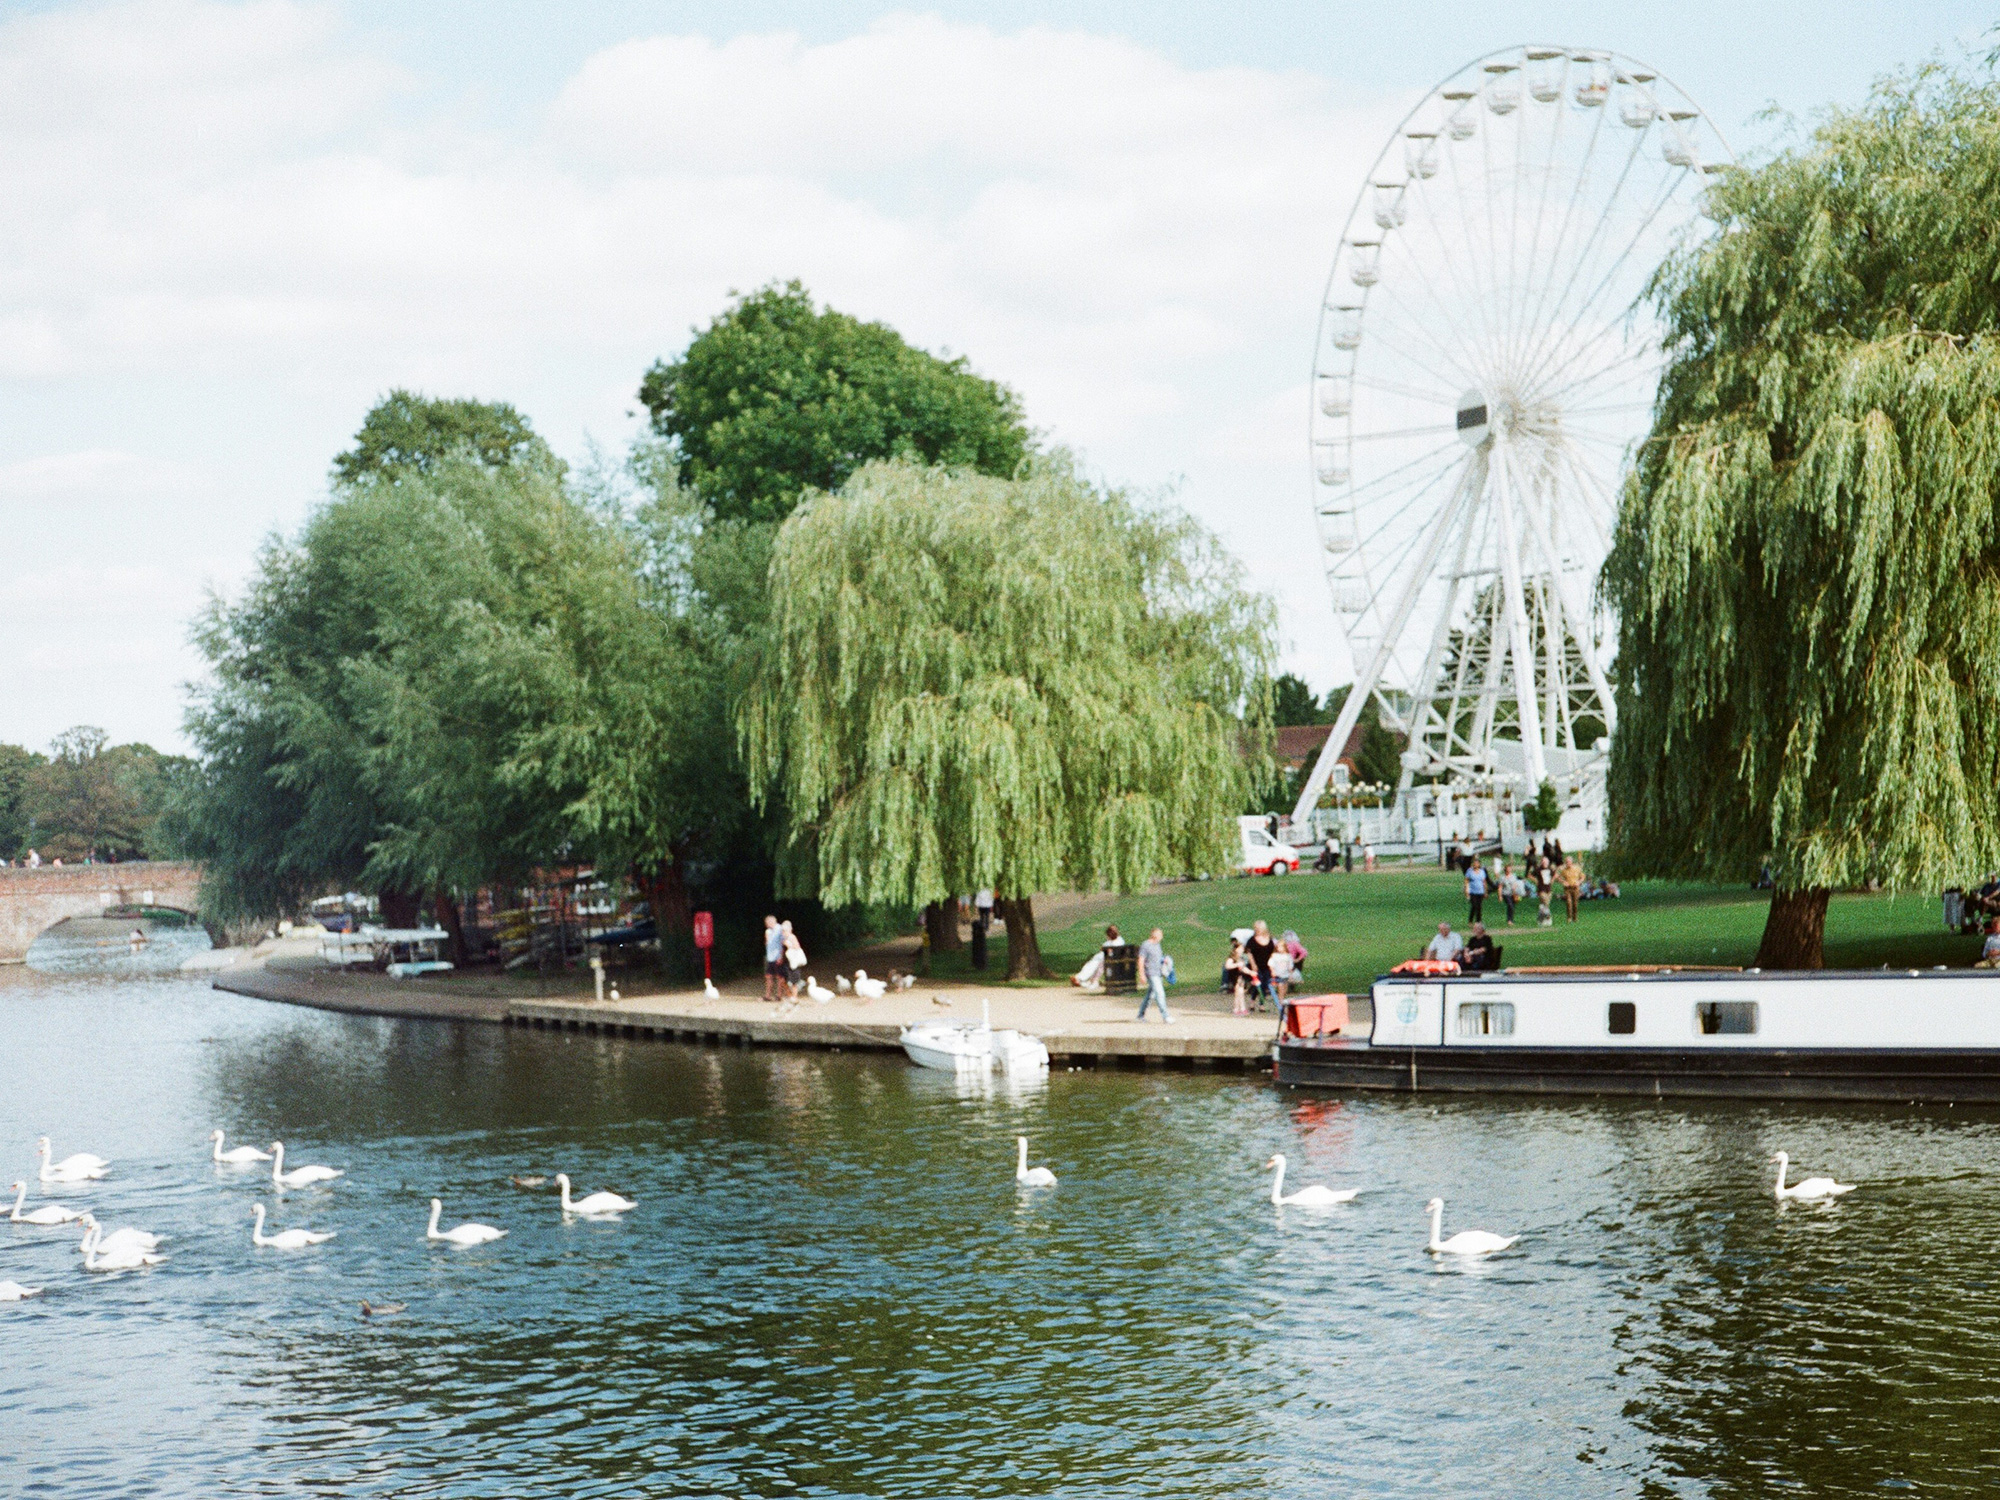 The River Avon bends through Stratford Town Centre, swans flock next to a barge, set against a backdrop of weeping willow trees and a ferris wheel.